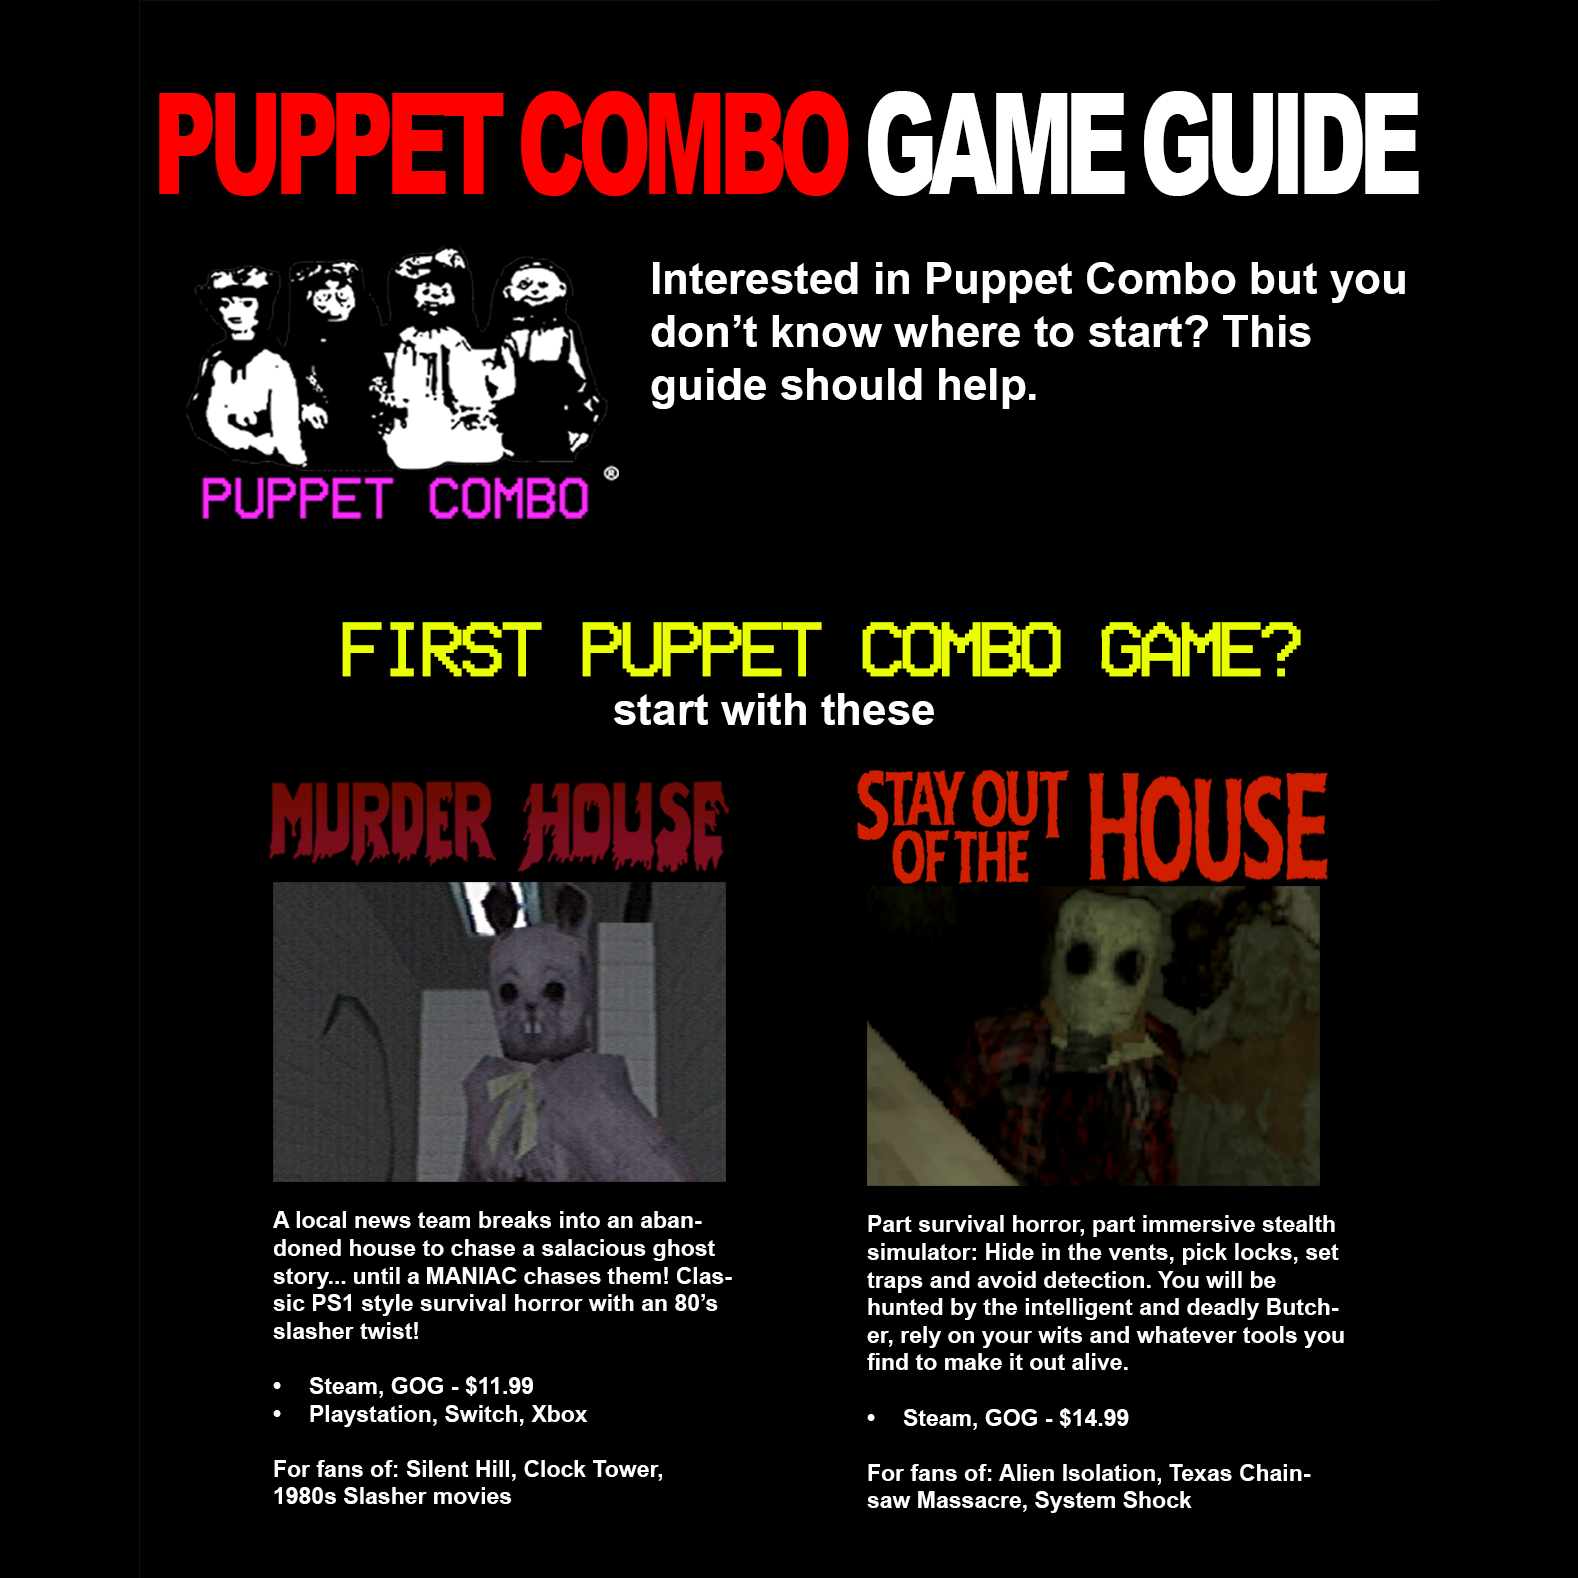 PUPPET COMBO, Creating 80's HORROR GAMES